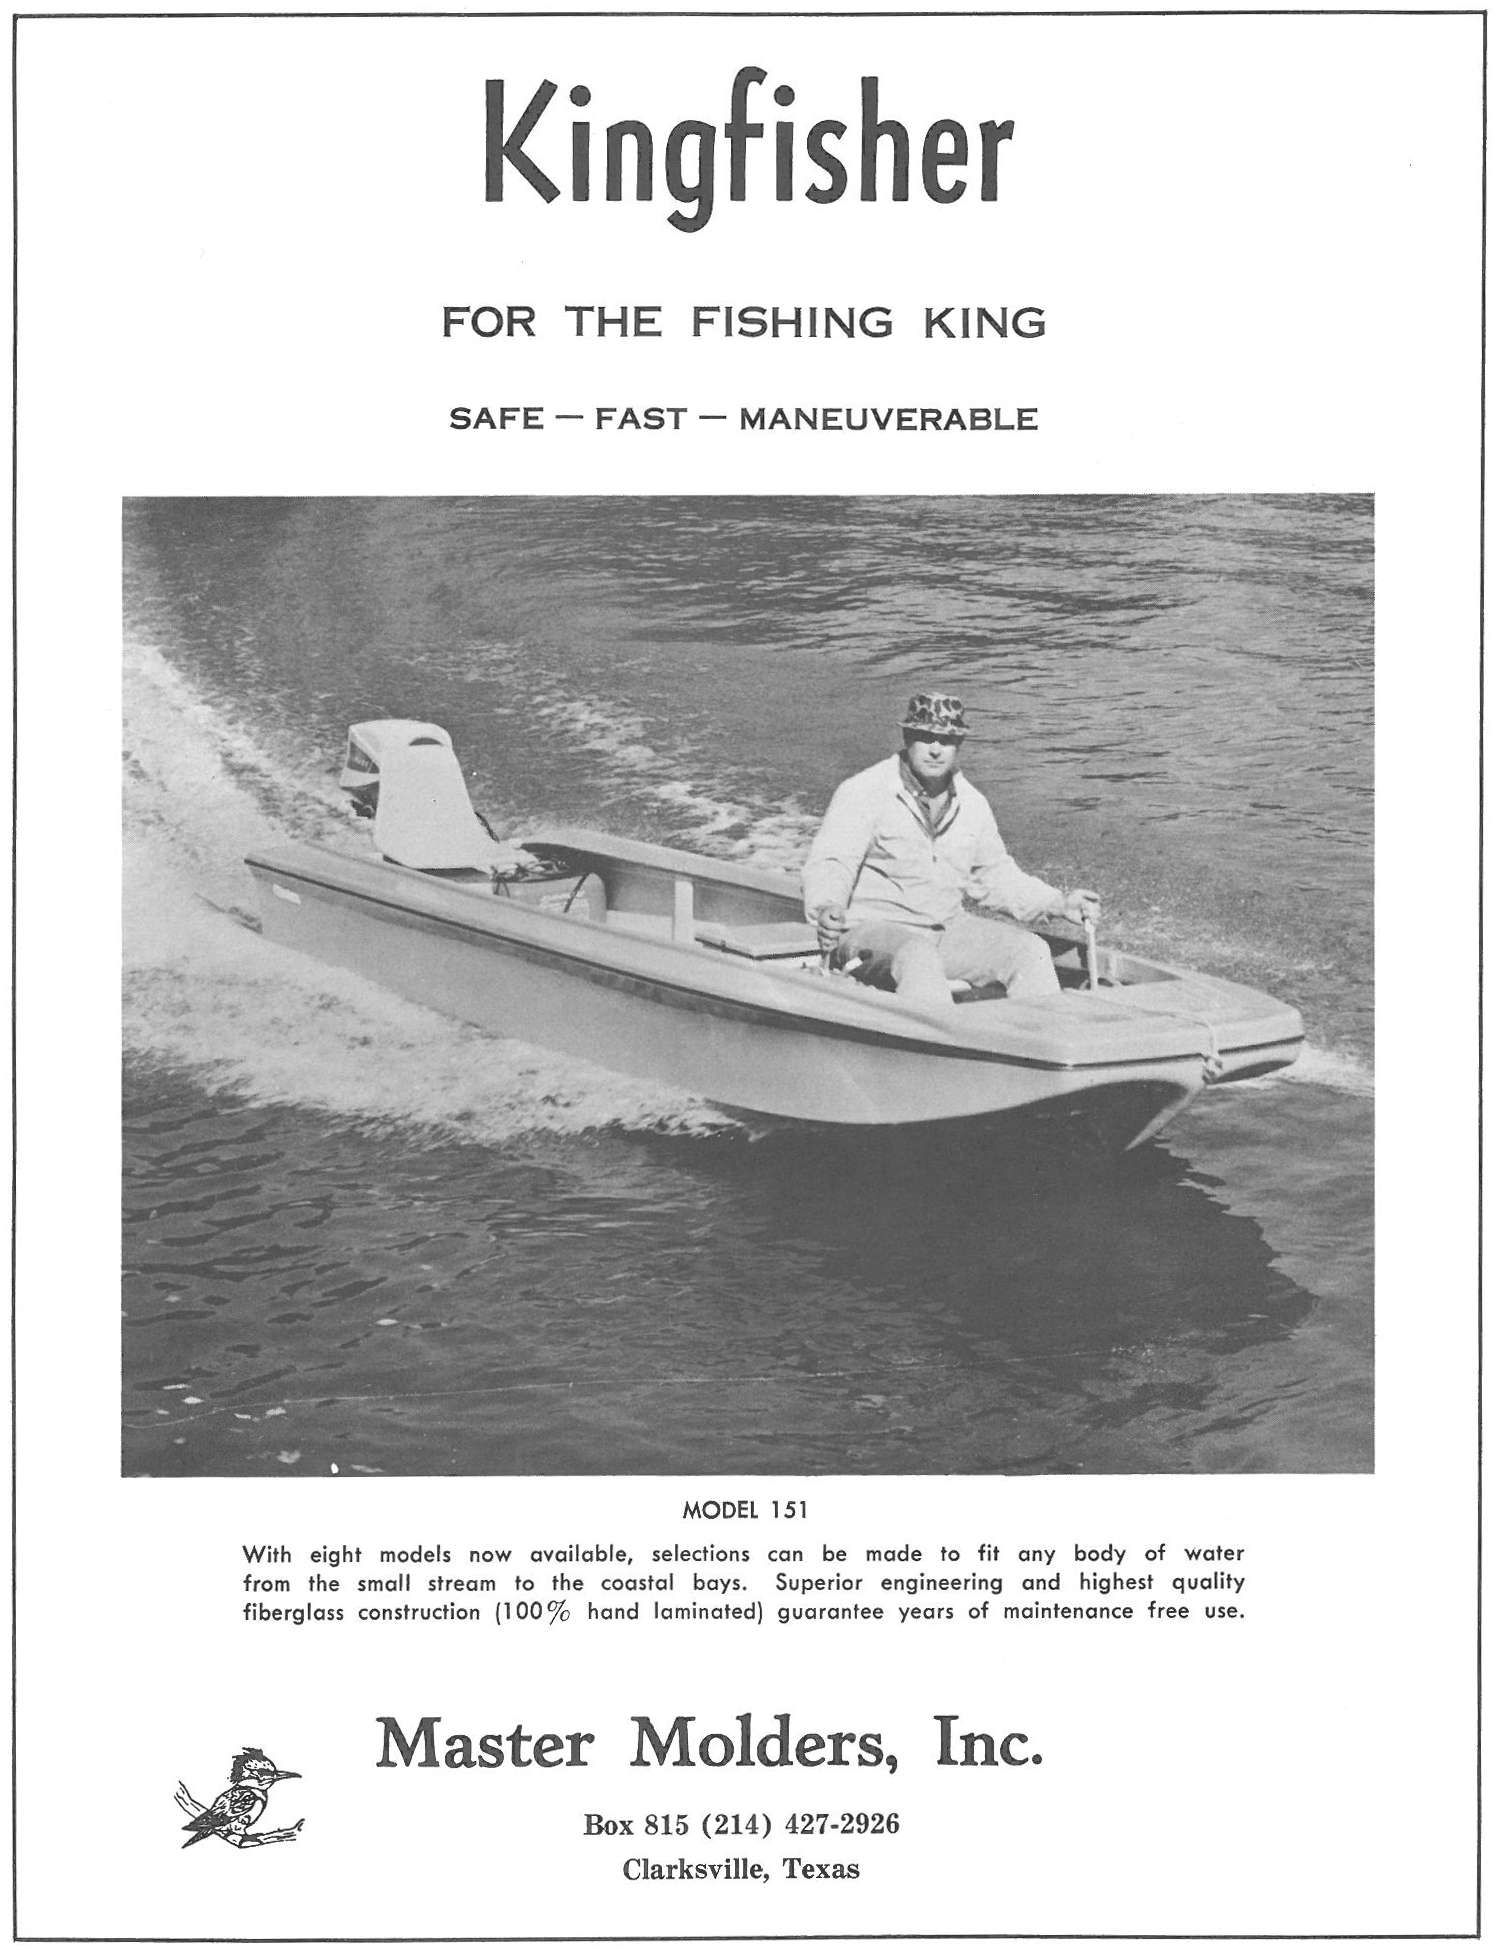 The first Bassmaster Magazine boat ad appears in this issue, and it promotes the Kingfisher brand. Kingfisher is still around today, and according to the company's website, its first aluminum fishing boat hit the water in 1959.